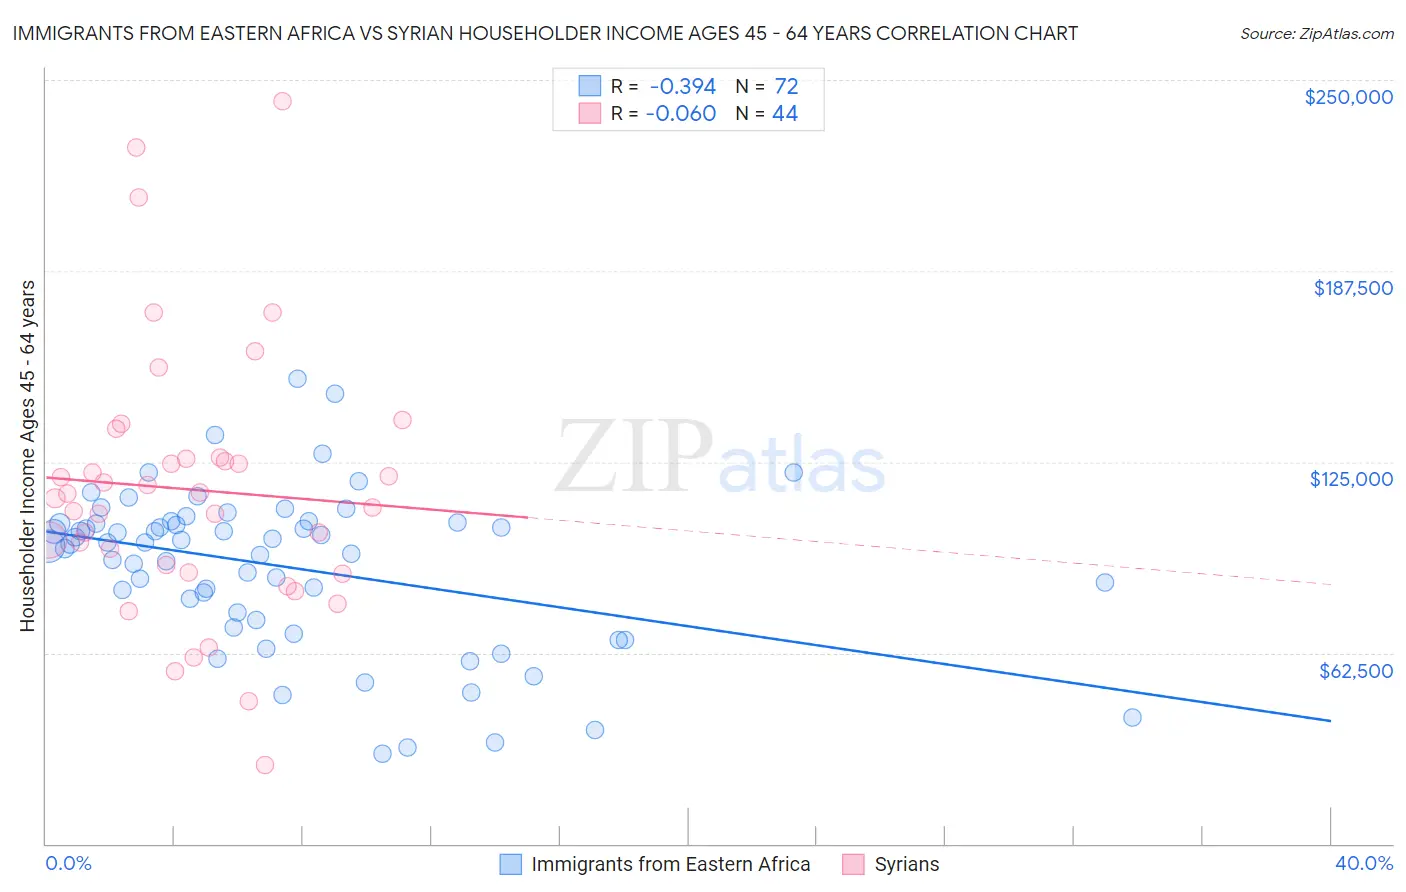 Immigrants from Eastern Africa vs Syrian Householder Income Ages 45 - 64 years